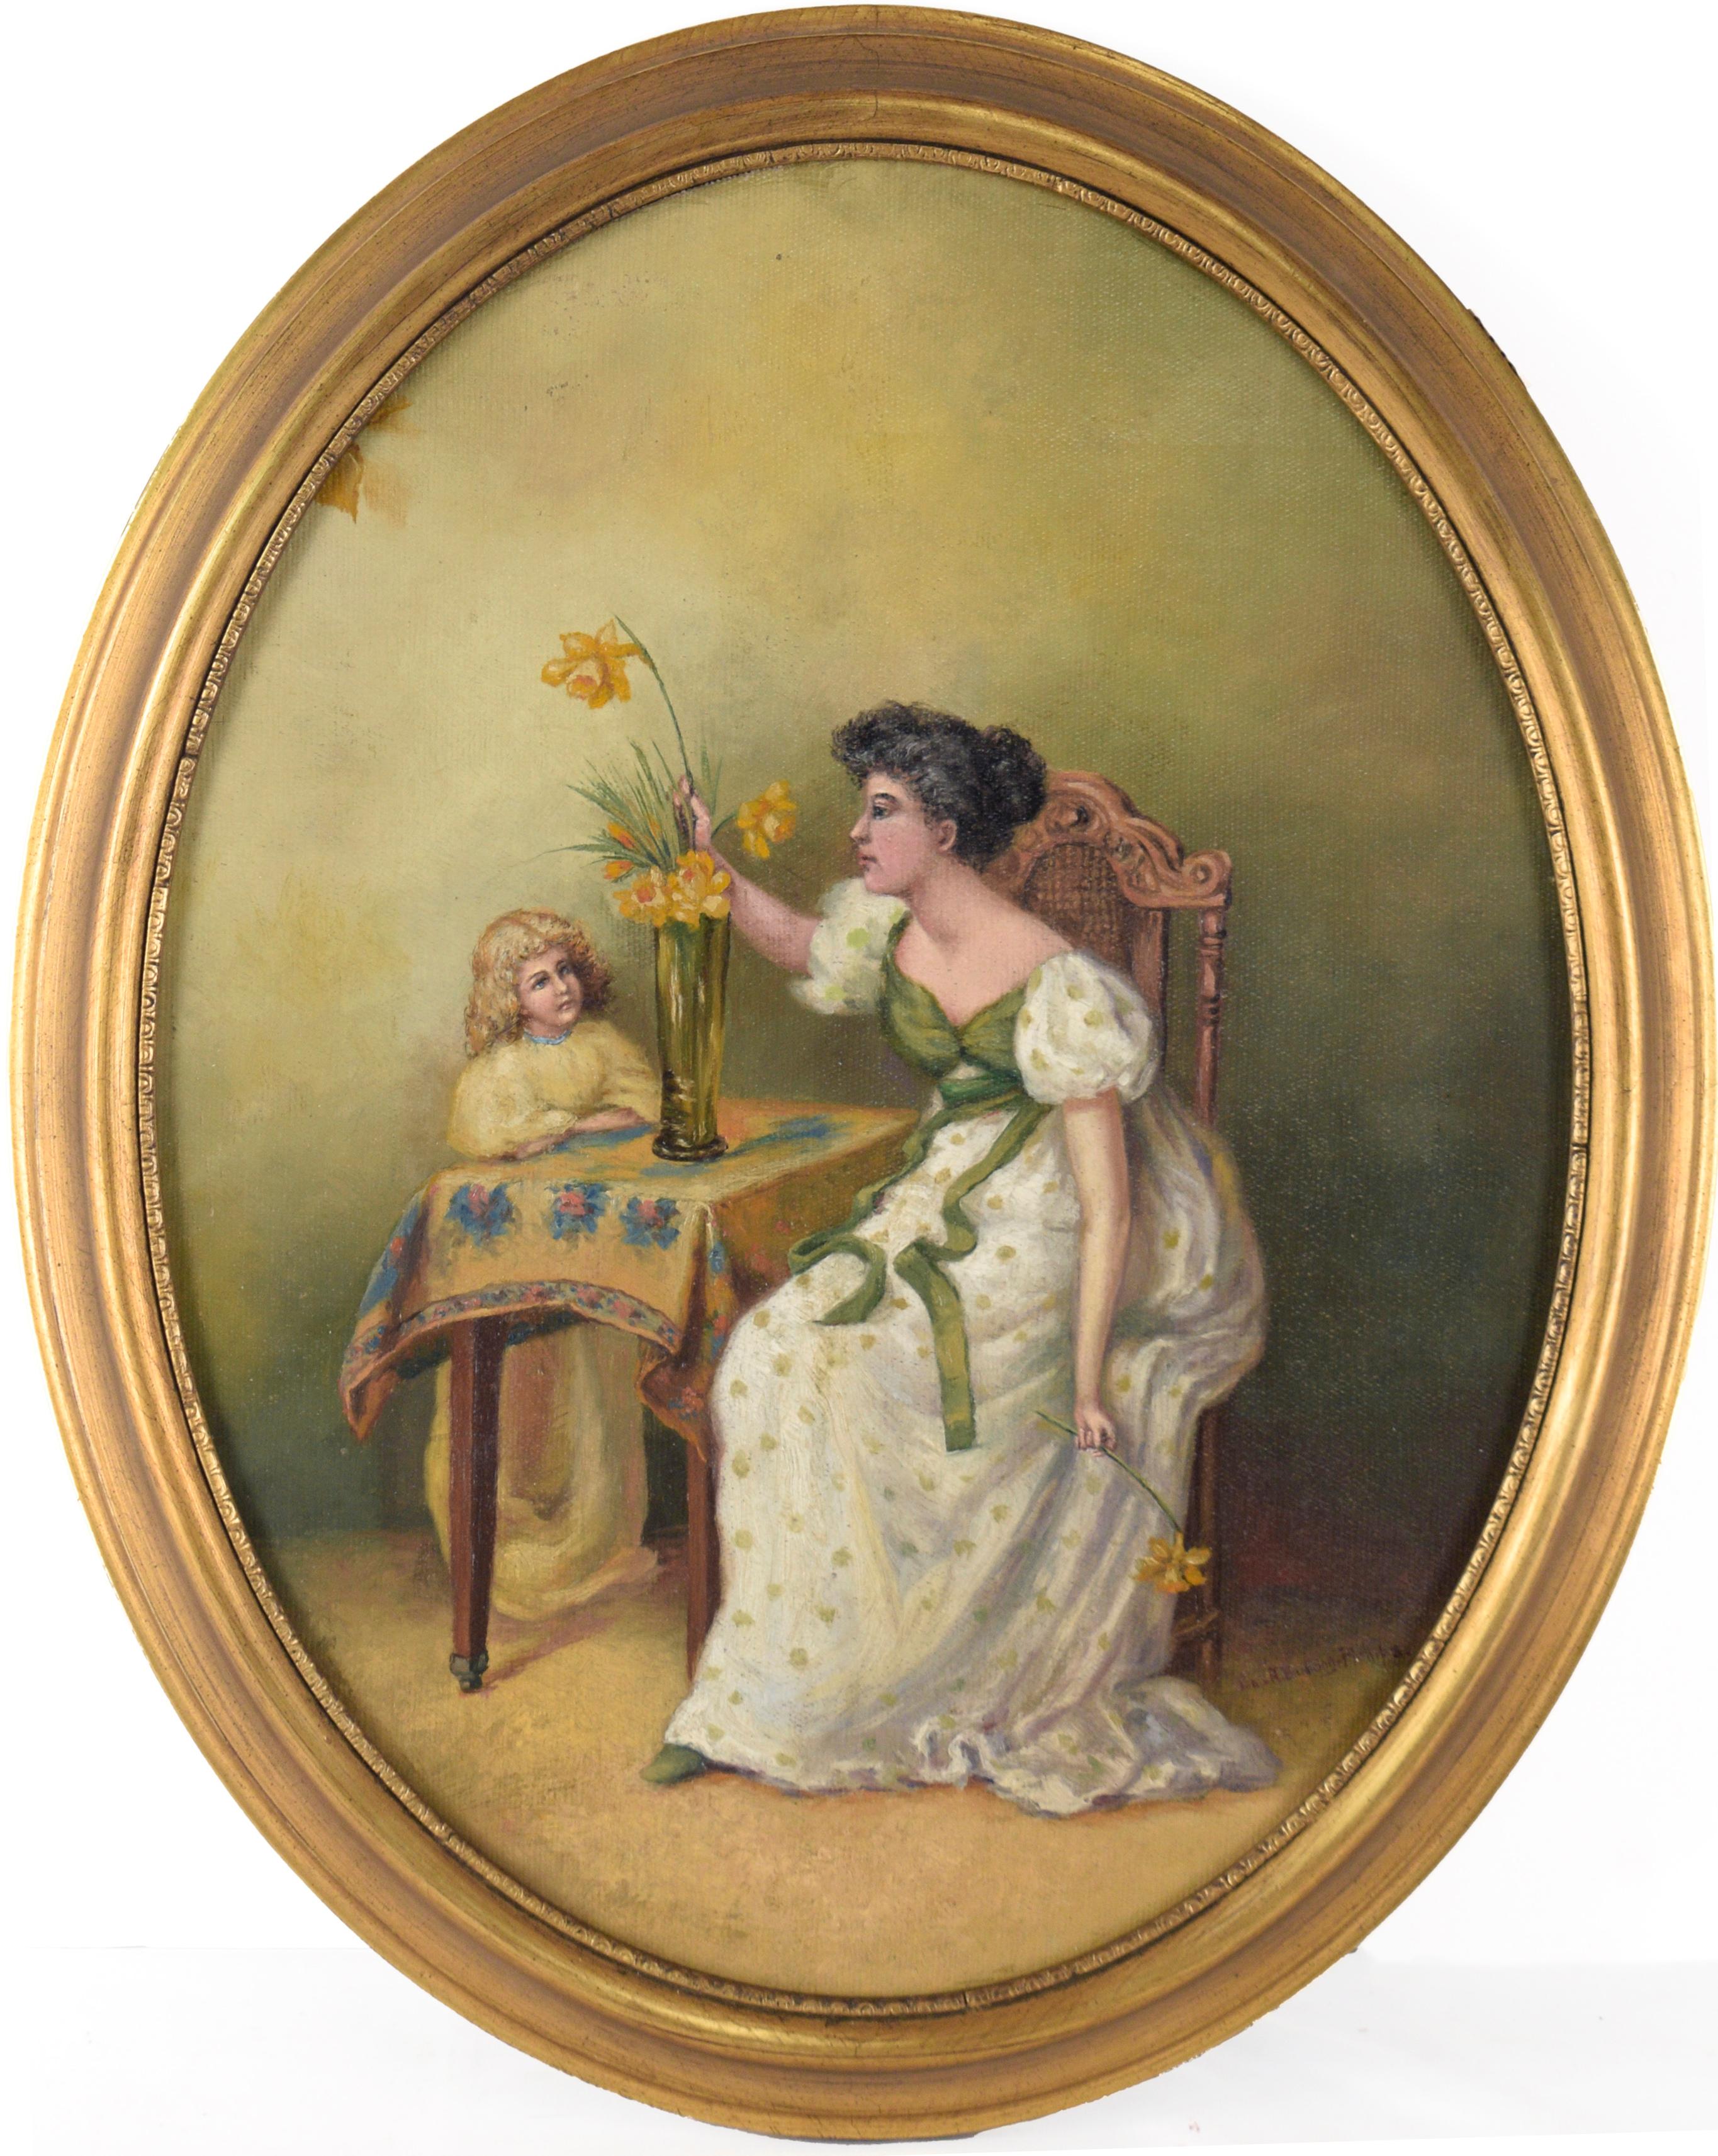 Mother and Daughter Arranging Daffodils in a Vase - Oil on Canvas